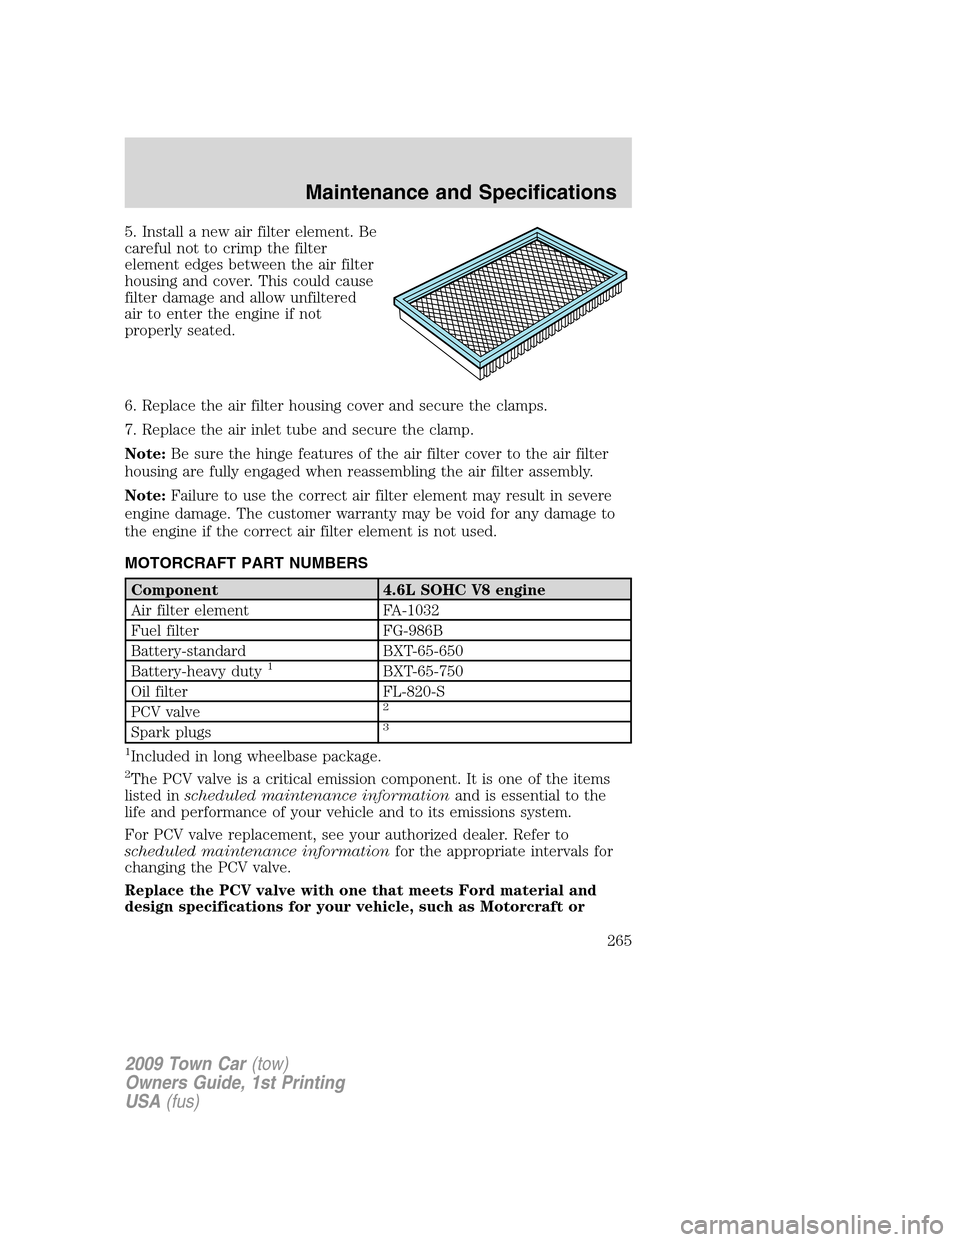 LINCOLN TOWN CAR 2009  Owners Manual 5. Install a new air filter element. Be
careful not to crimp the filter
element edges between the air filter
housing and cover. This could cause
filter damage and allow unfiltered
air to enter the eng